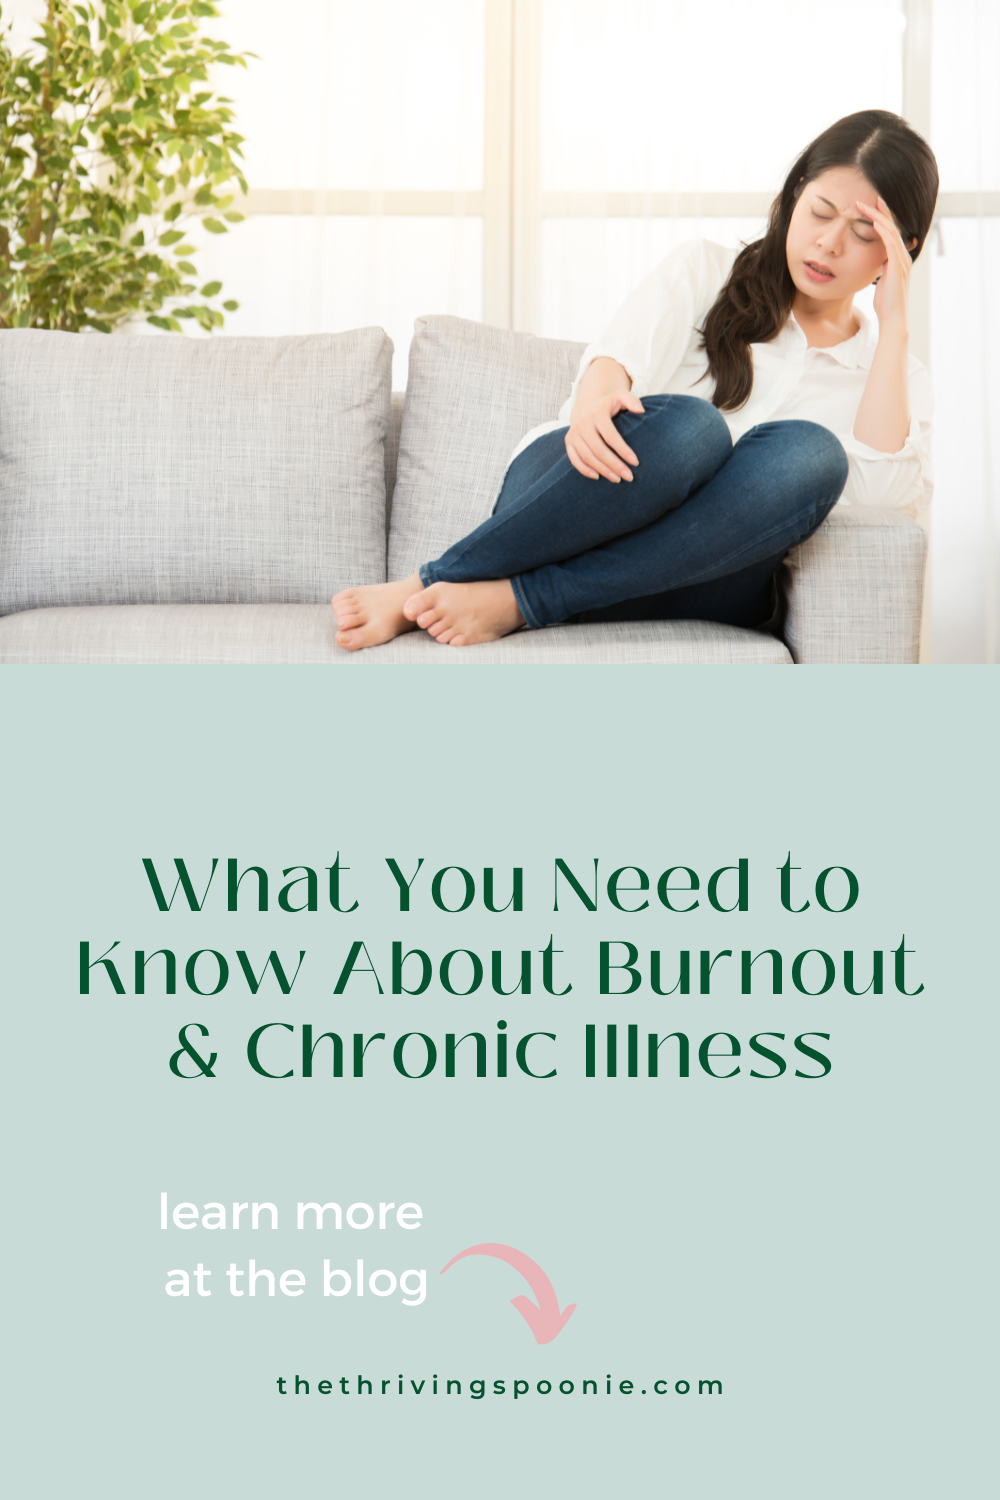 What You Need to Know About Burnout & Chronic Illness Pinterest Image